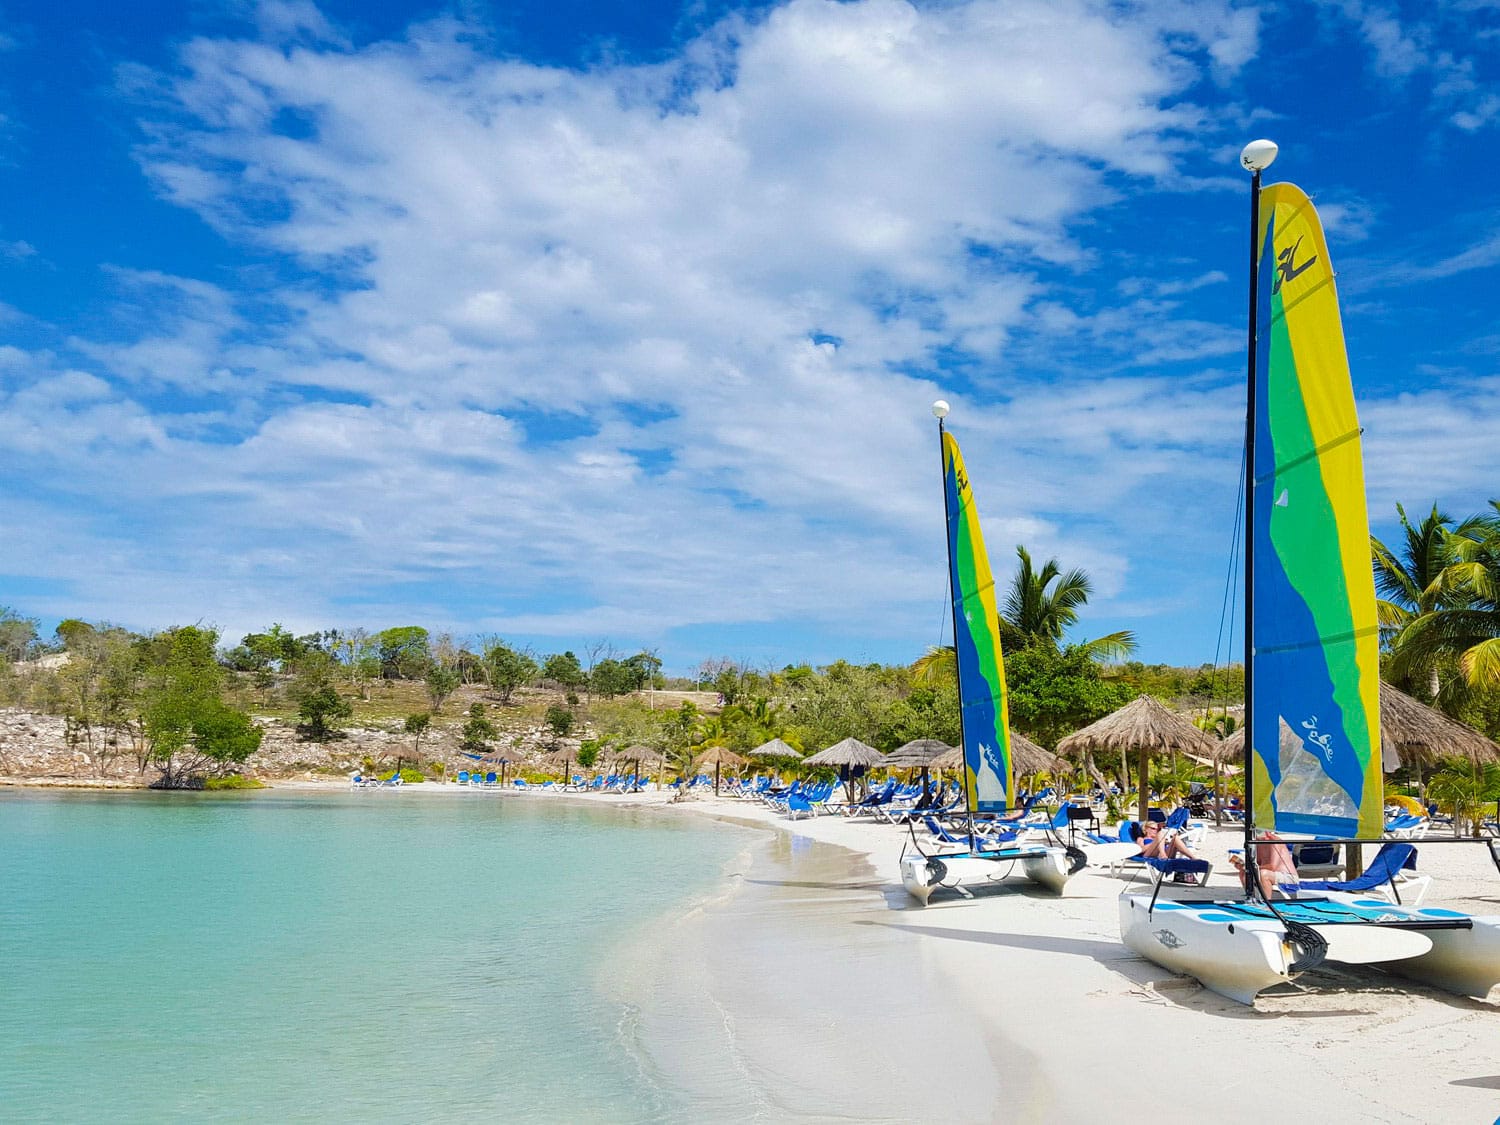 Verandah Resort and Spa sits on one of Antigua’s many beautiful beaches, and there’s a variety of water sports crafts available to guests.